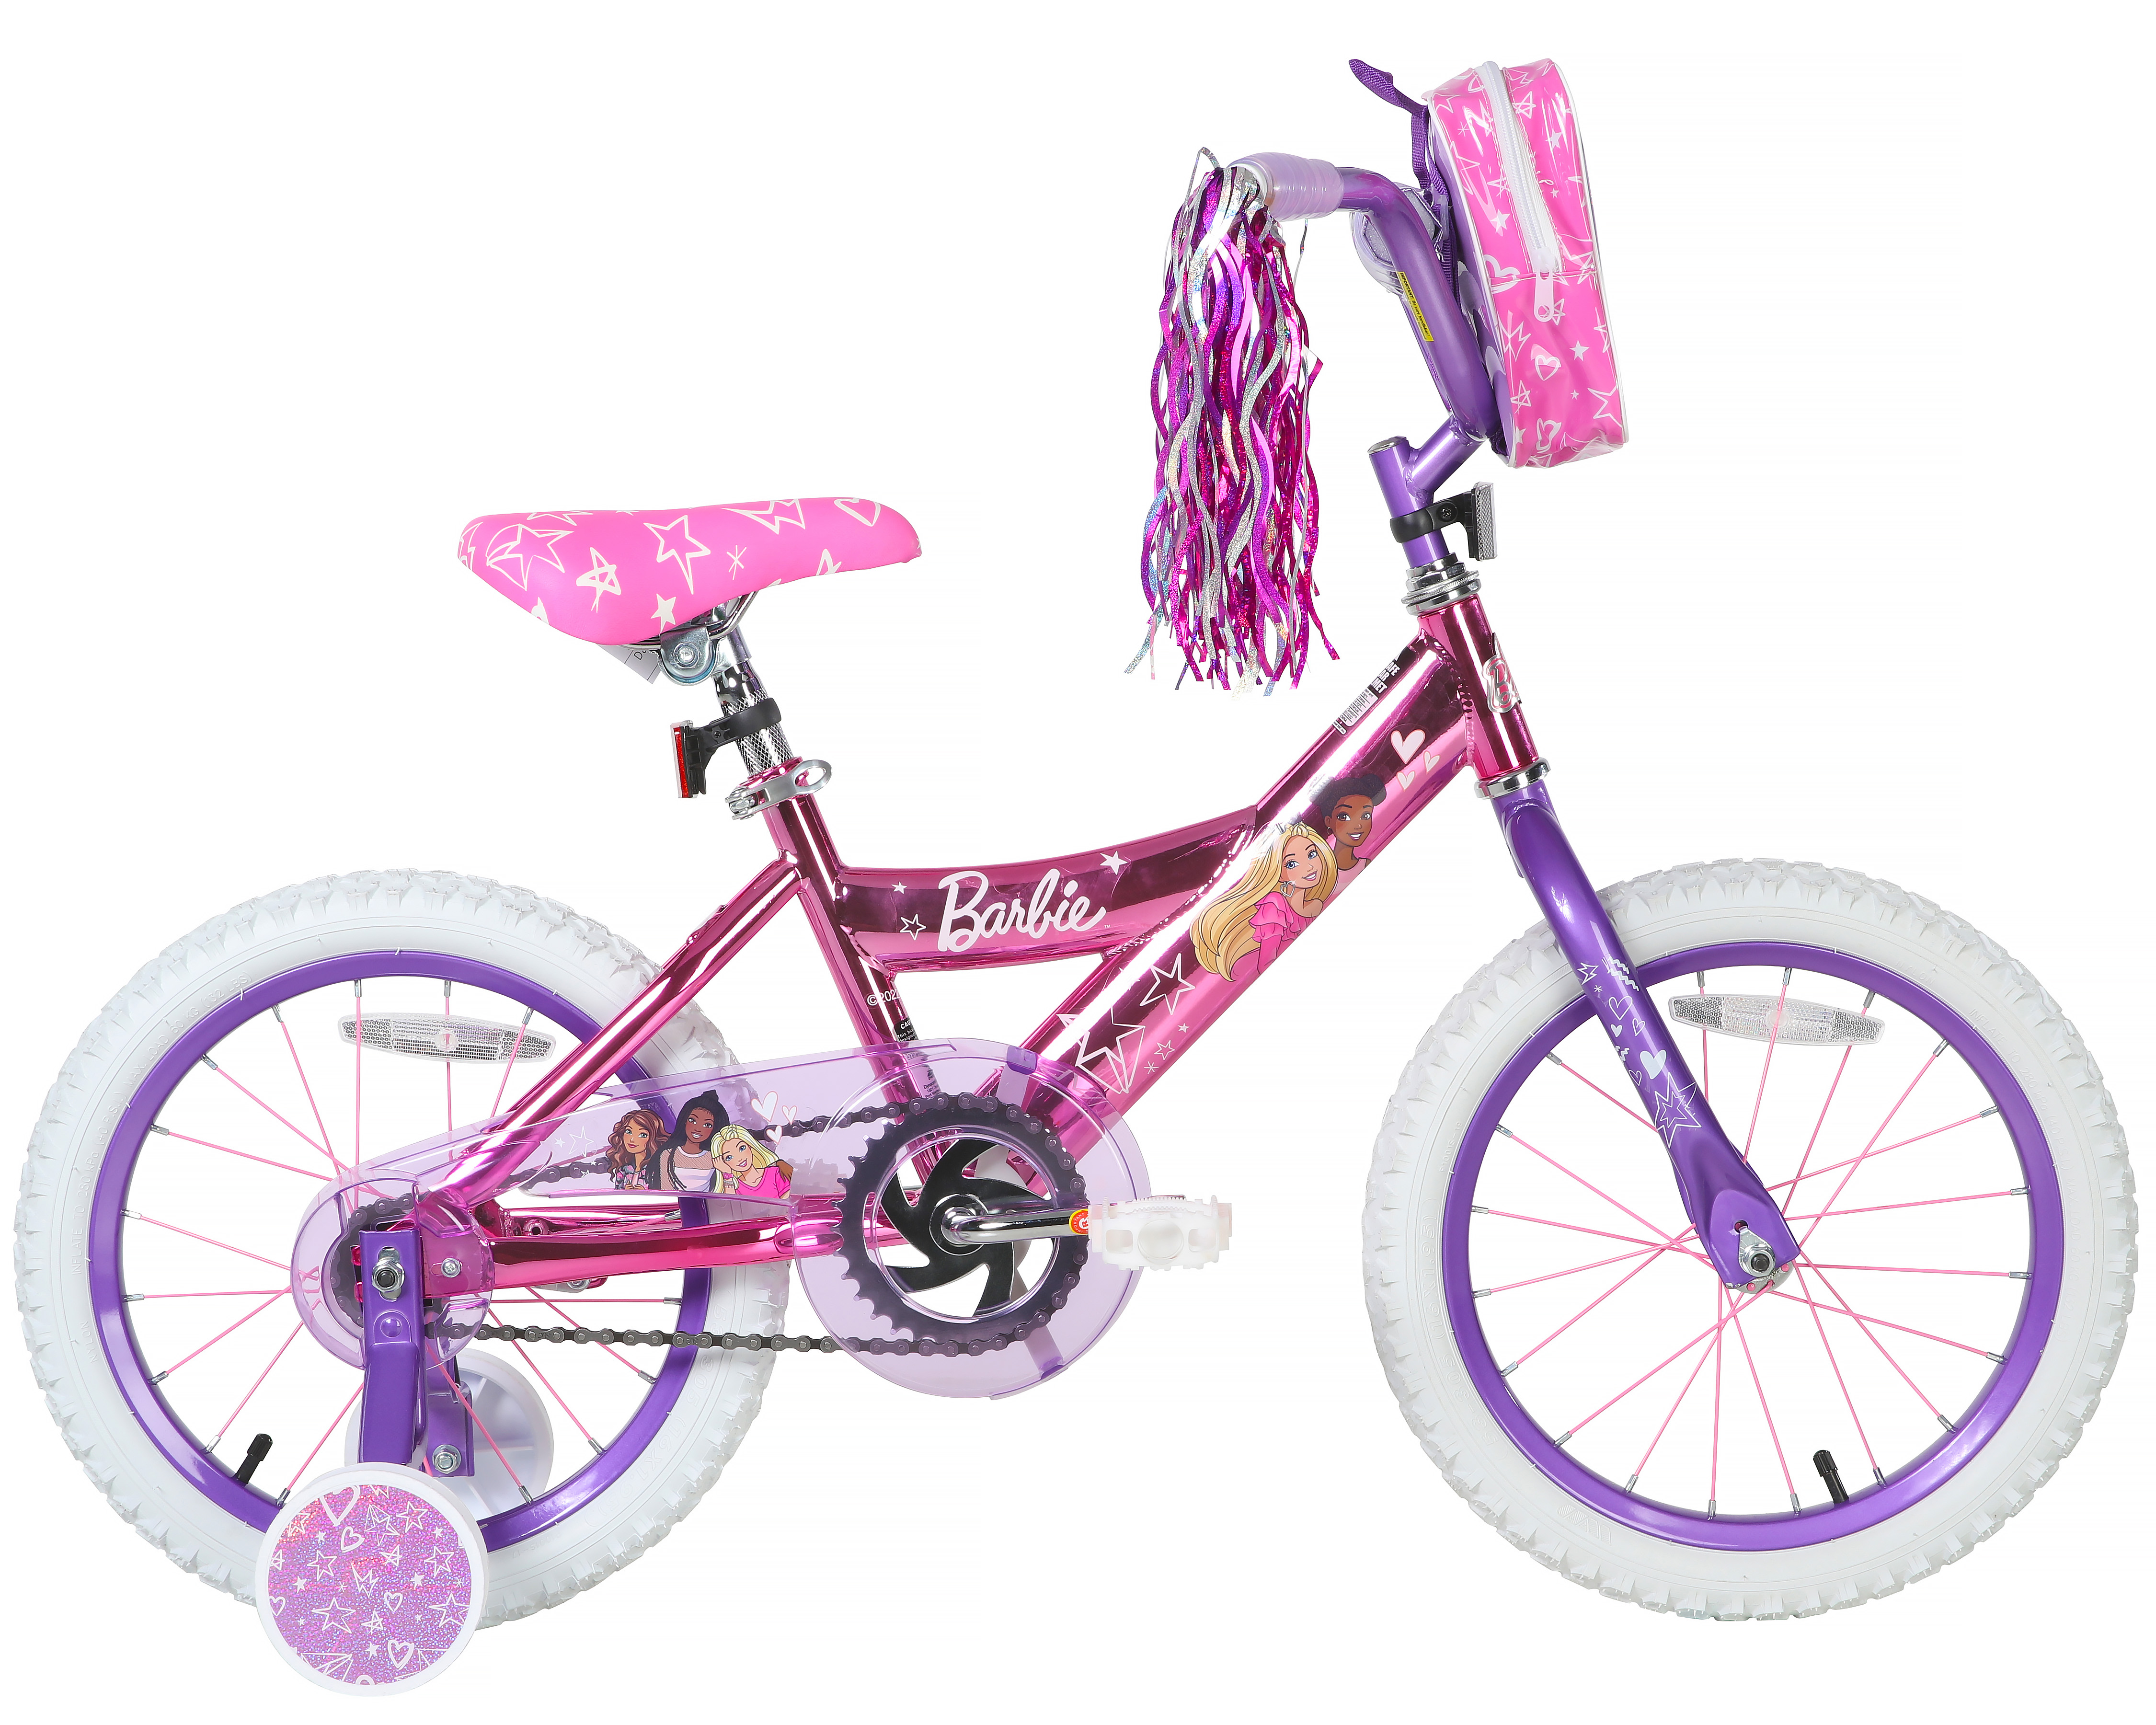 Dynacraft Barbie 16-inch Girls BMX Bike for Age 5-7 Years, Pink - image 1 of 8